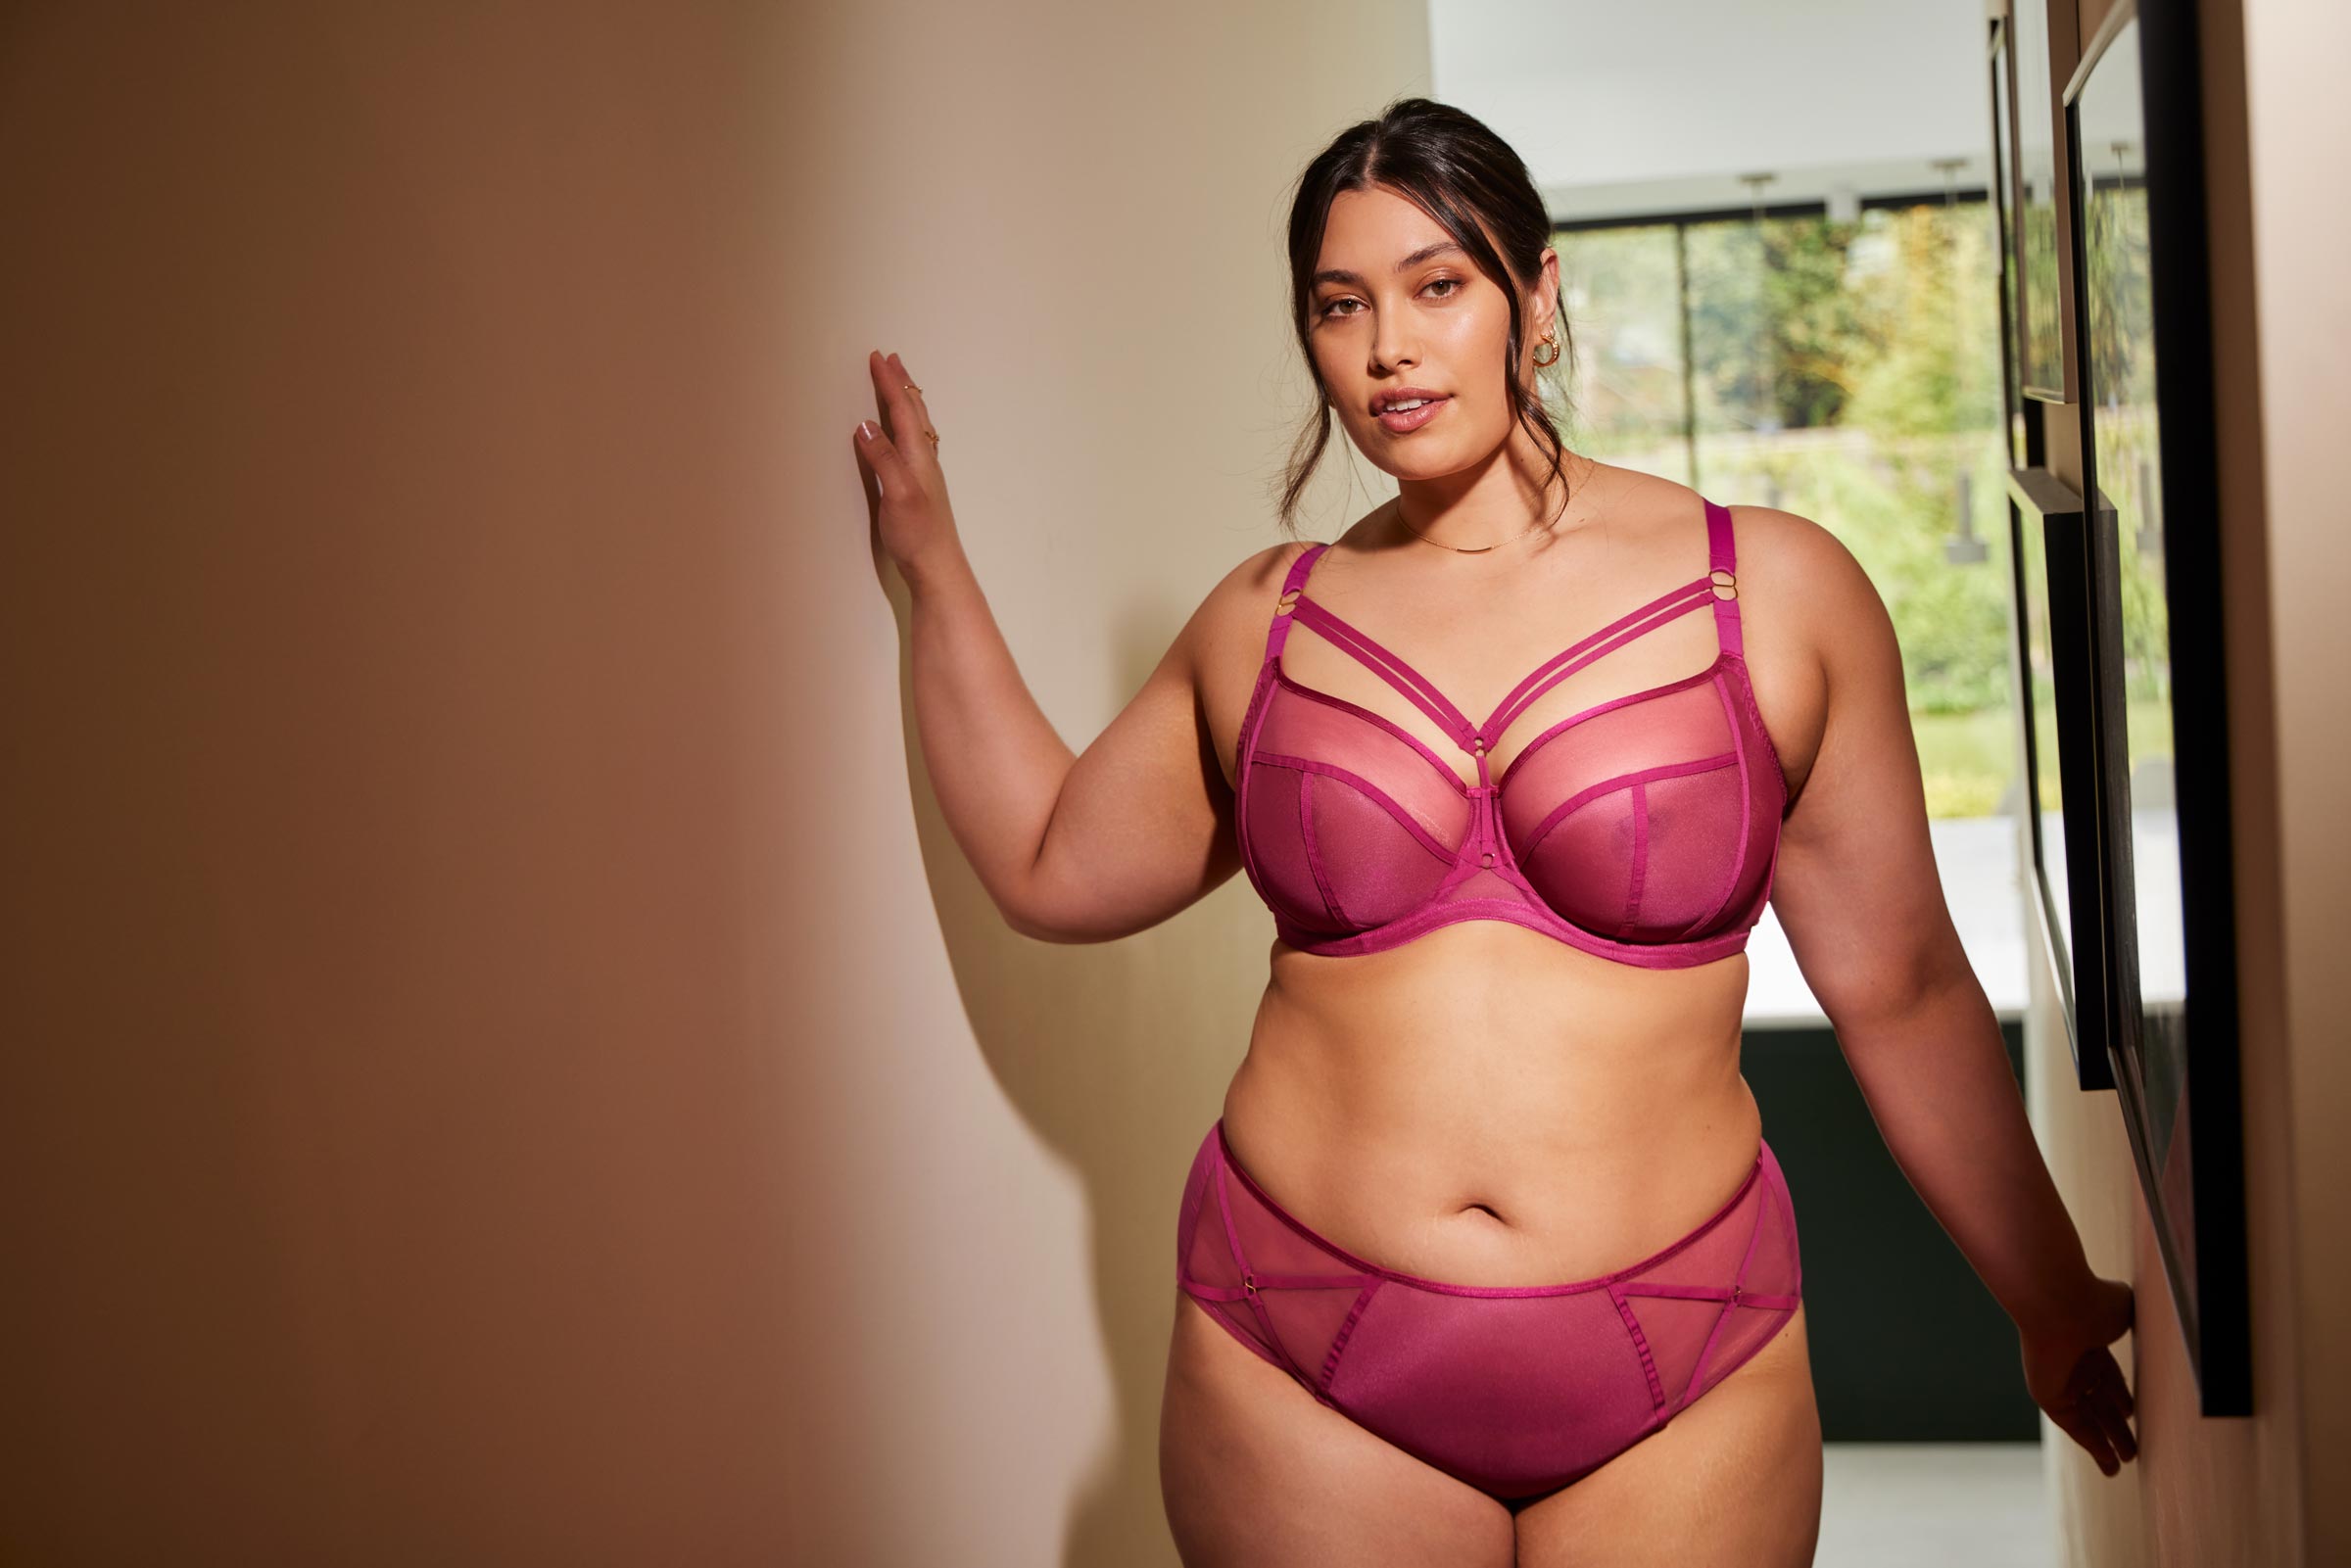 Best bra for a big, saggy bust according to a professional bra fitter